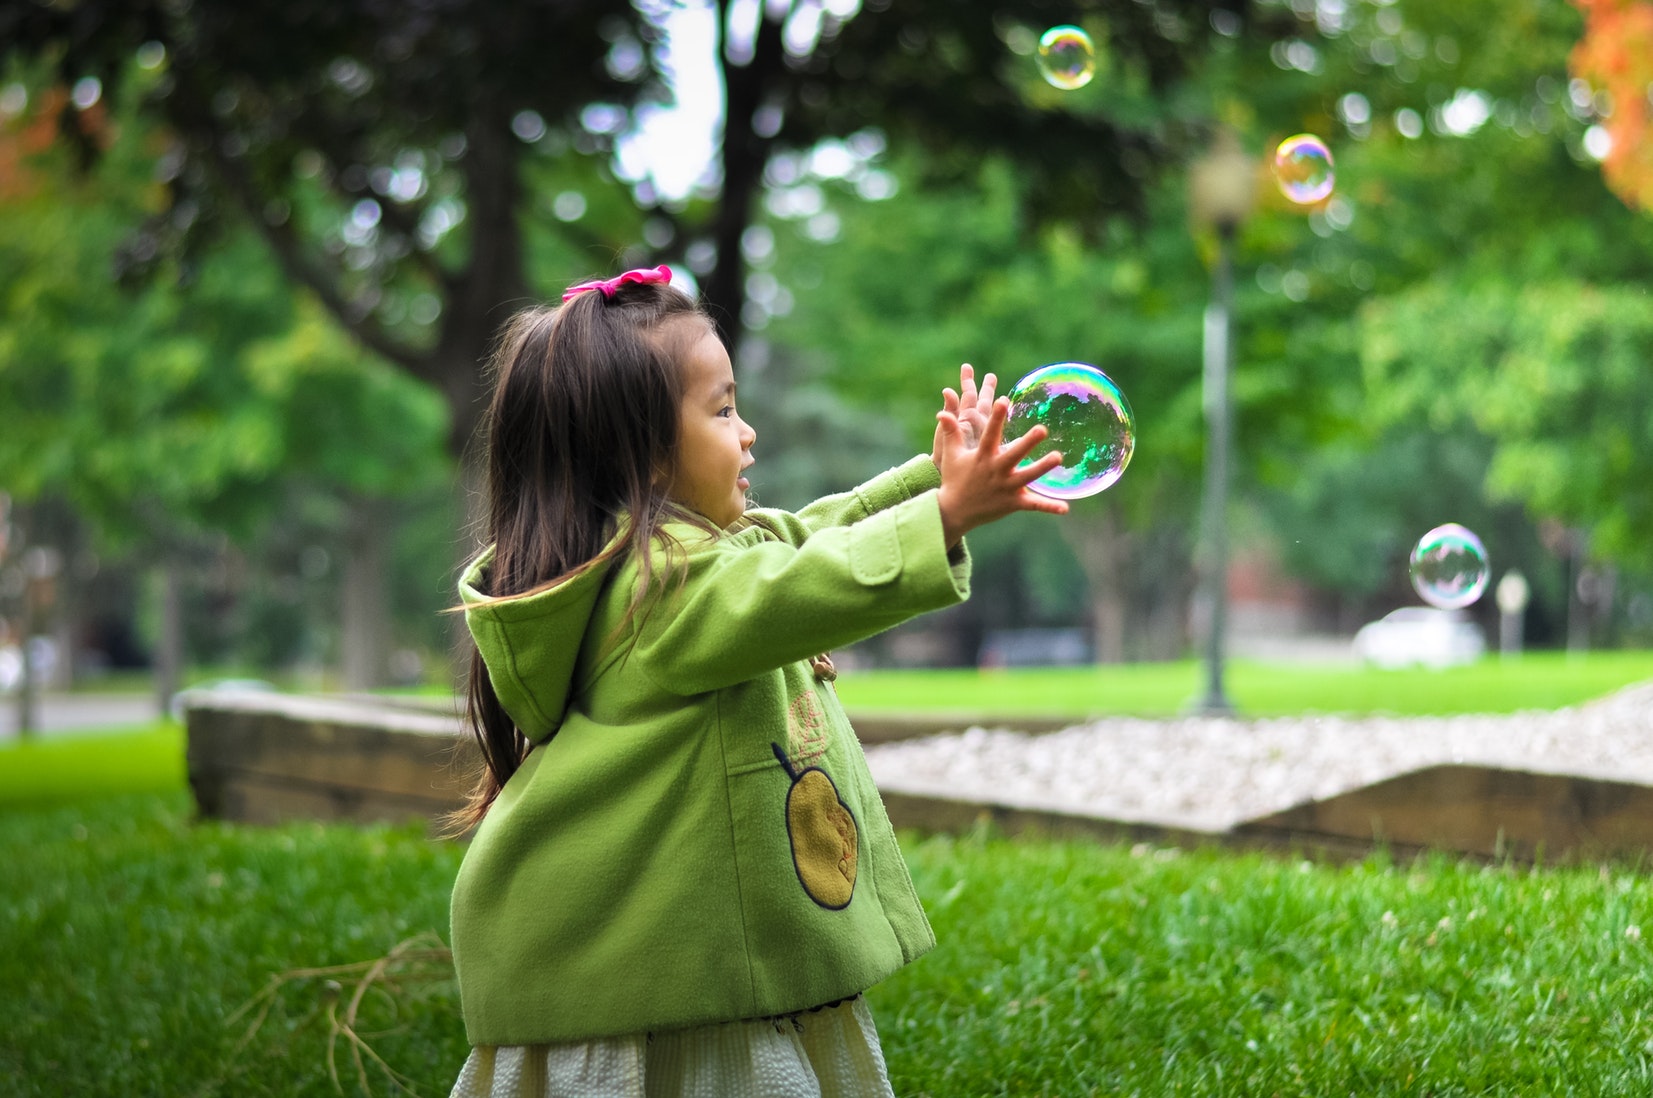 Young girl playing with bubble